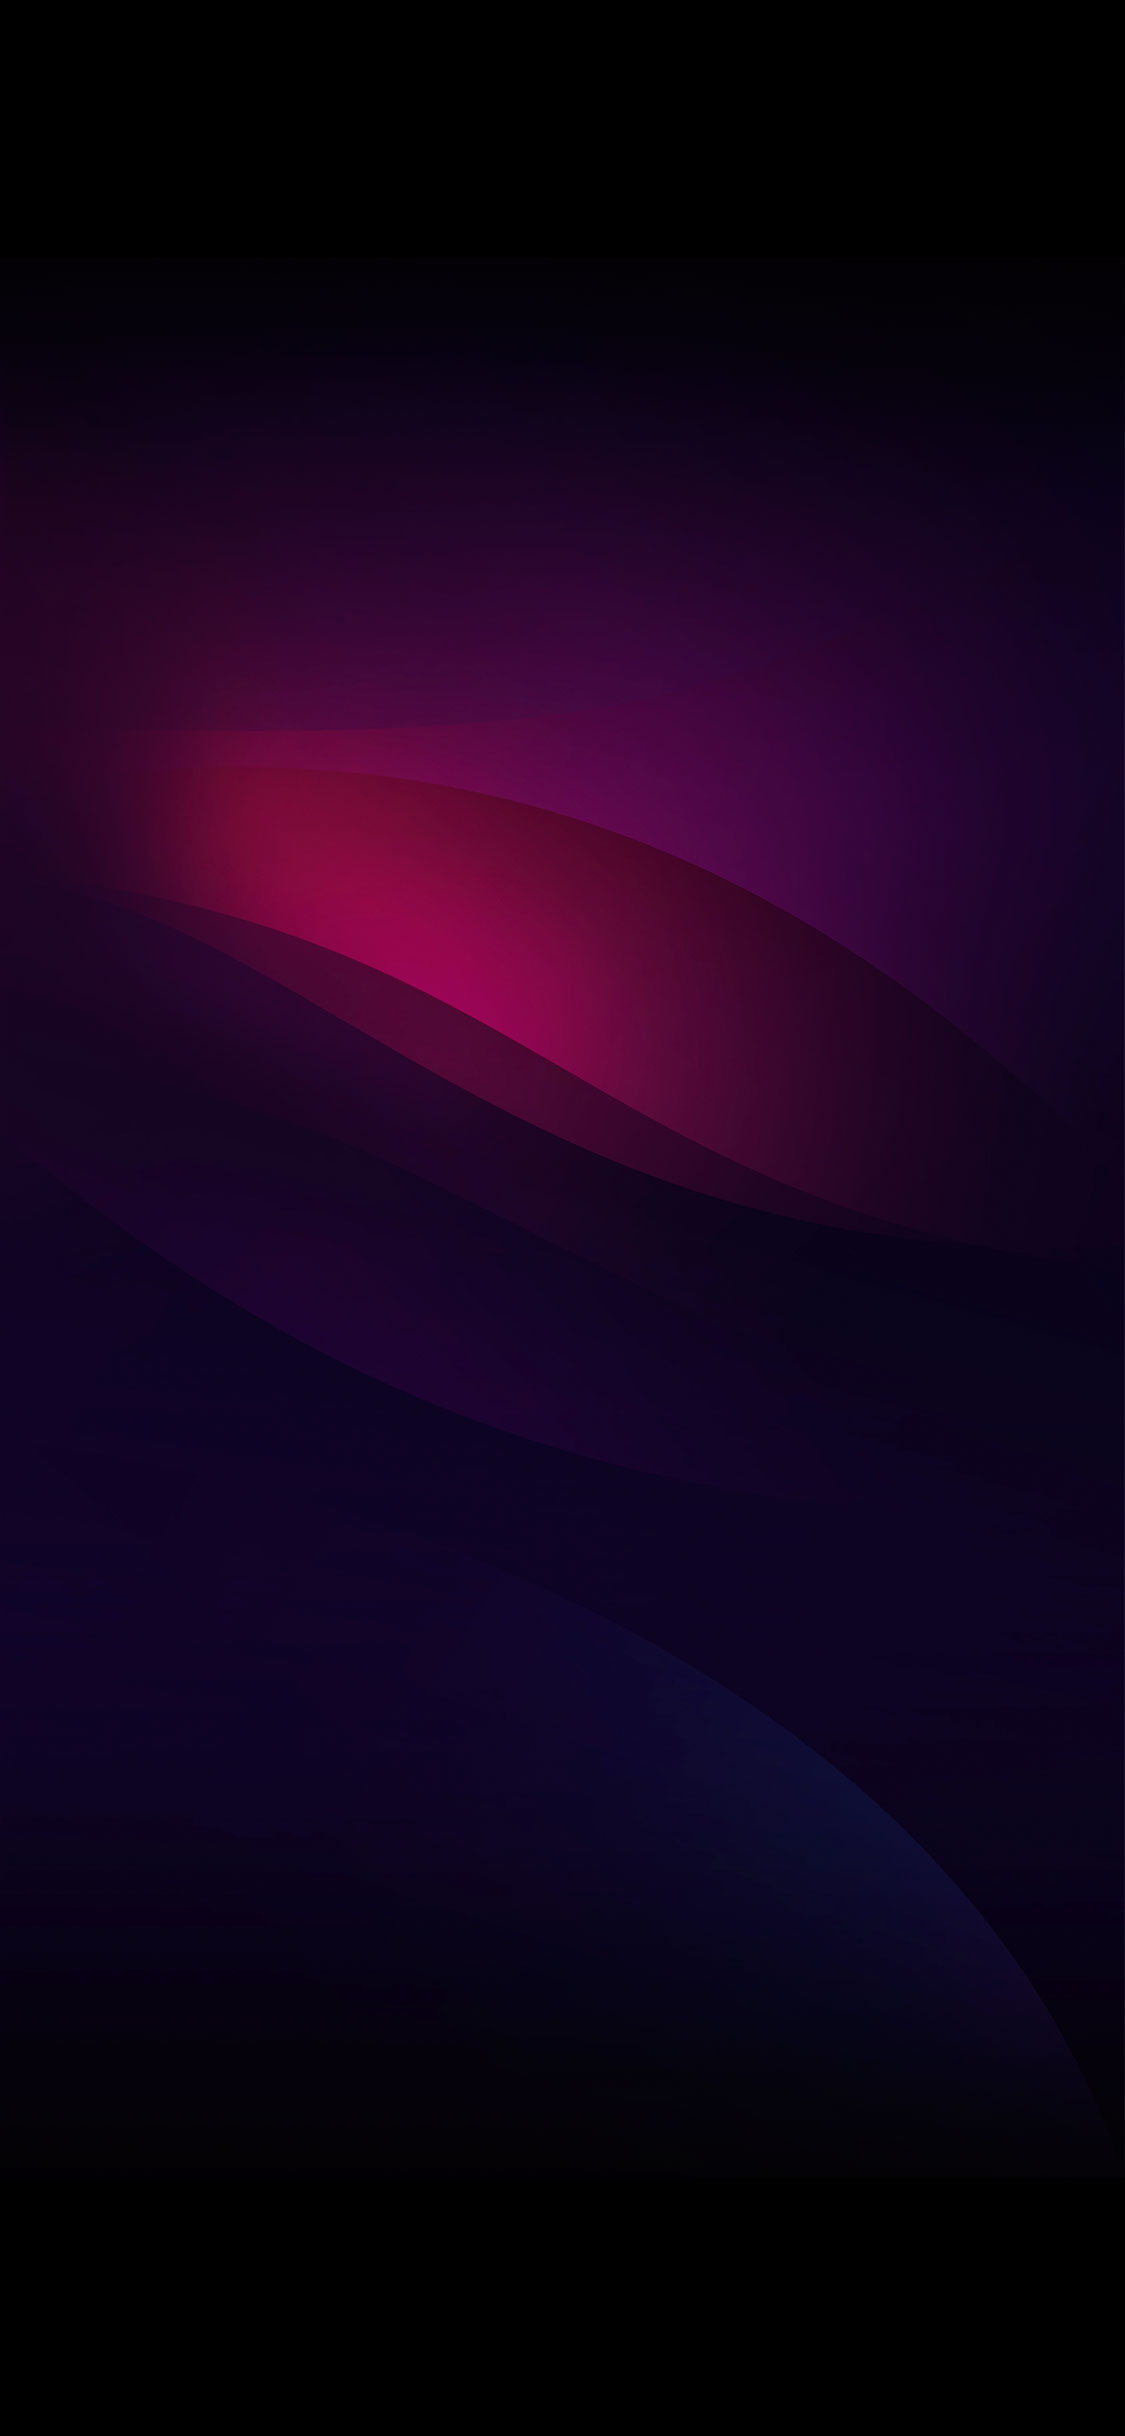 50 Best iPhone X Wallpapers Backgrounds